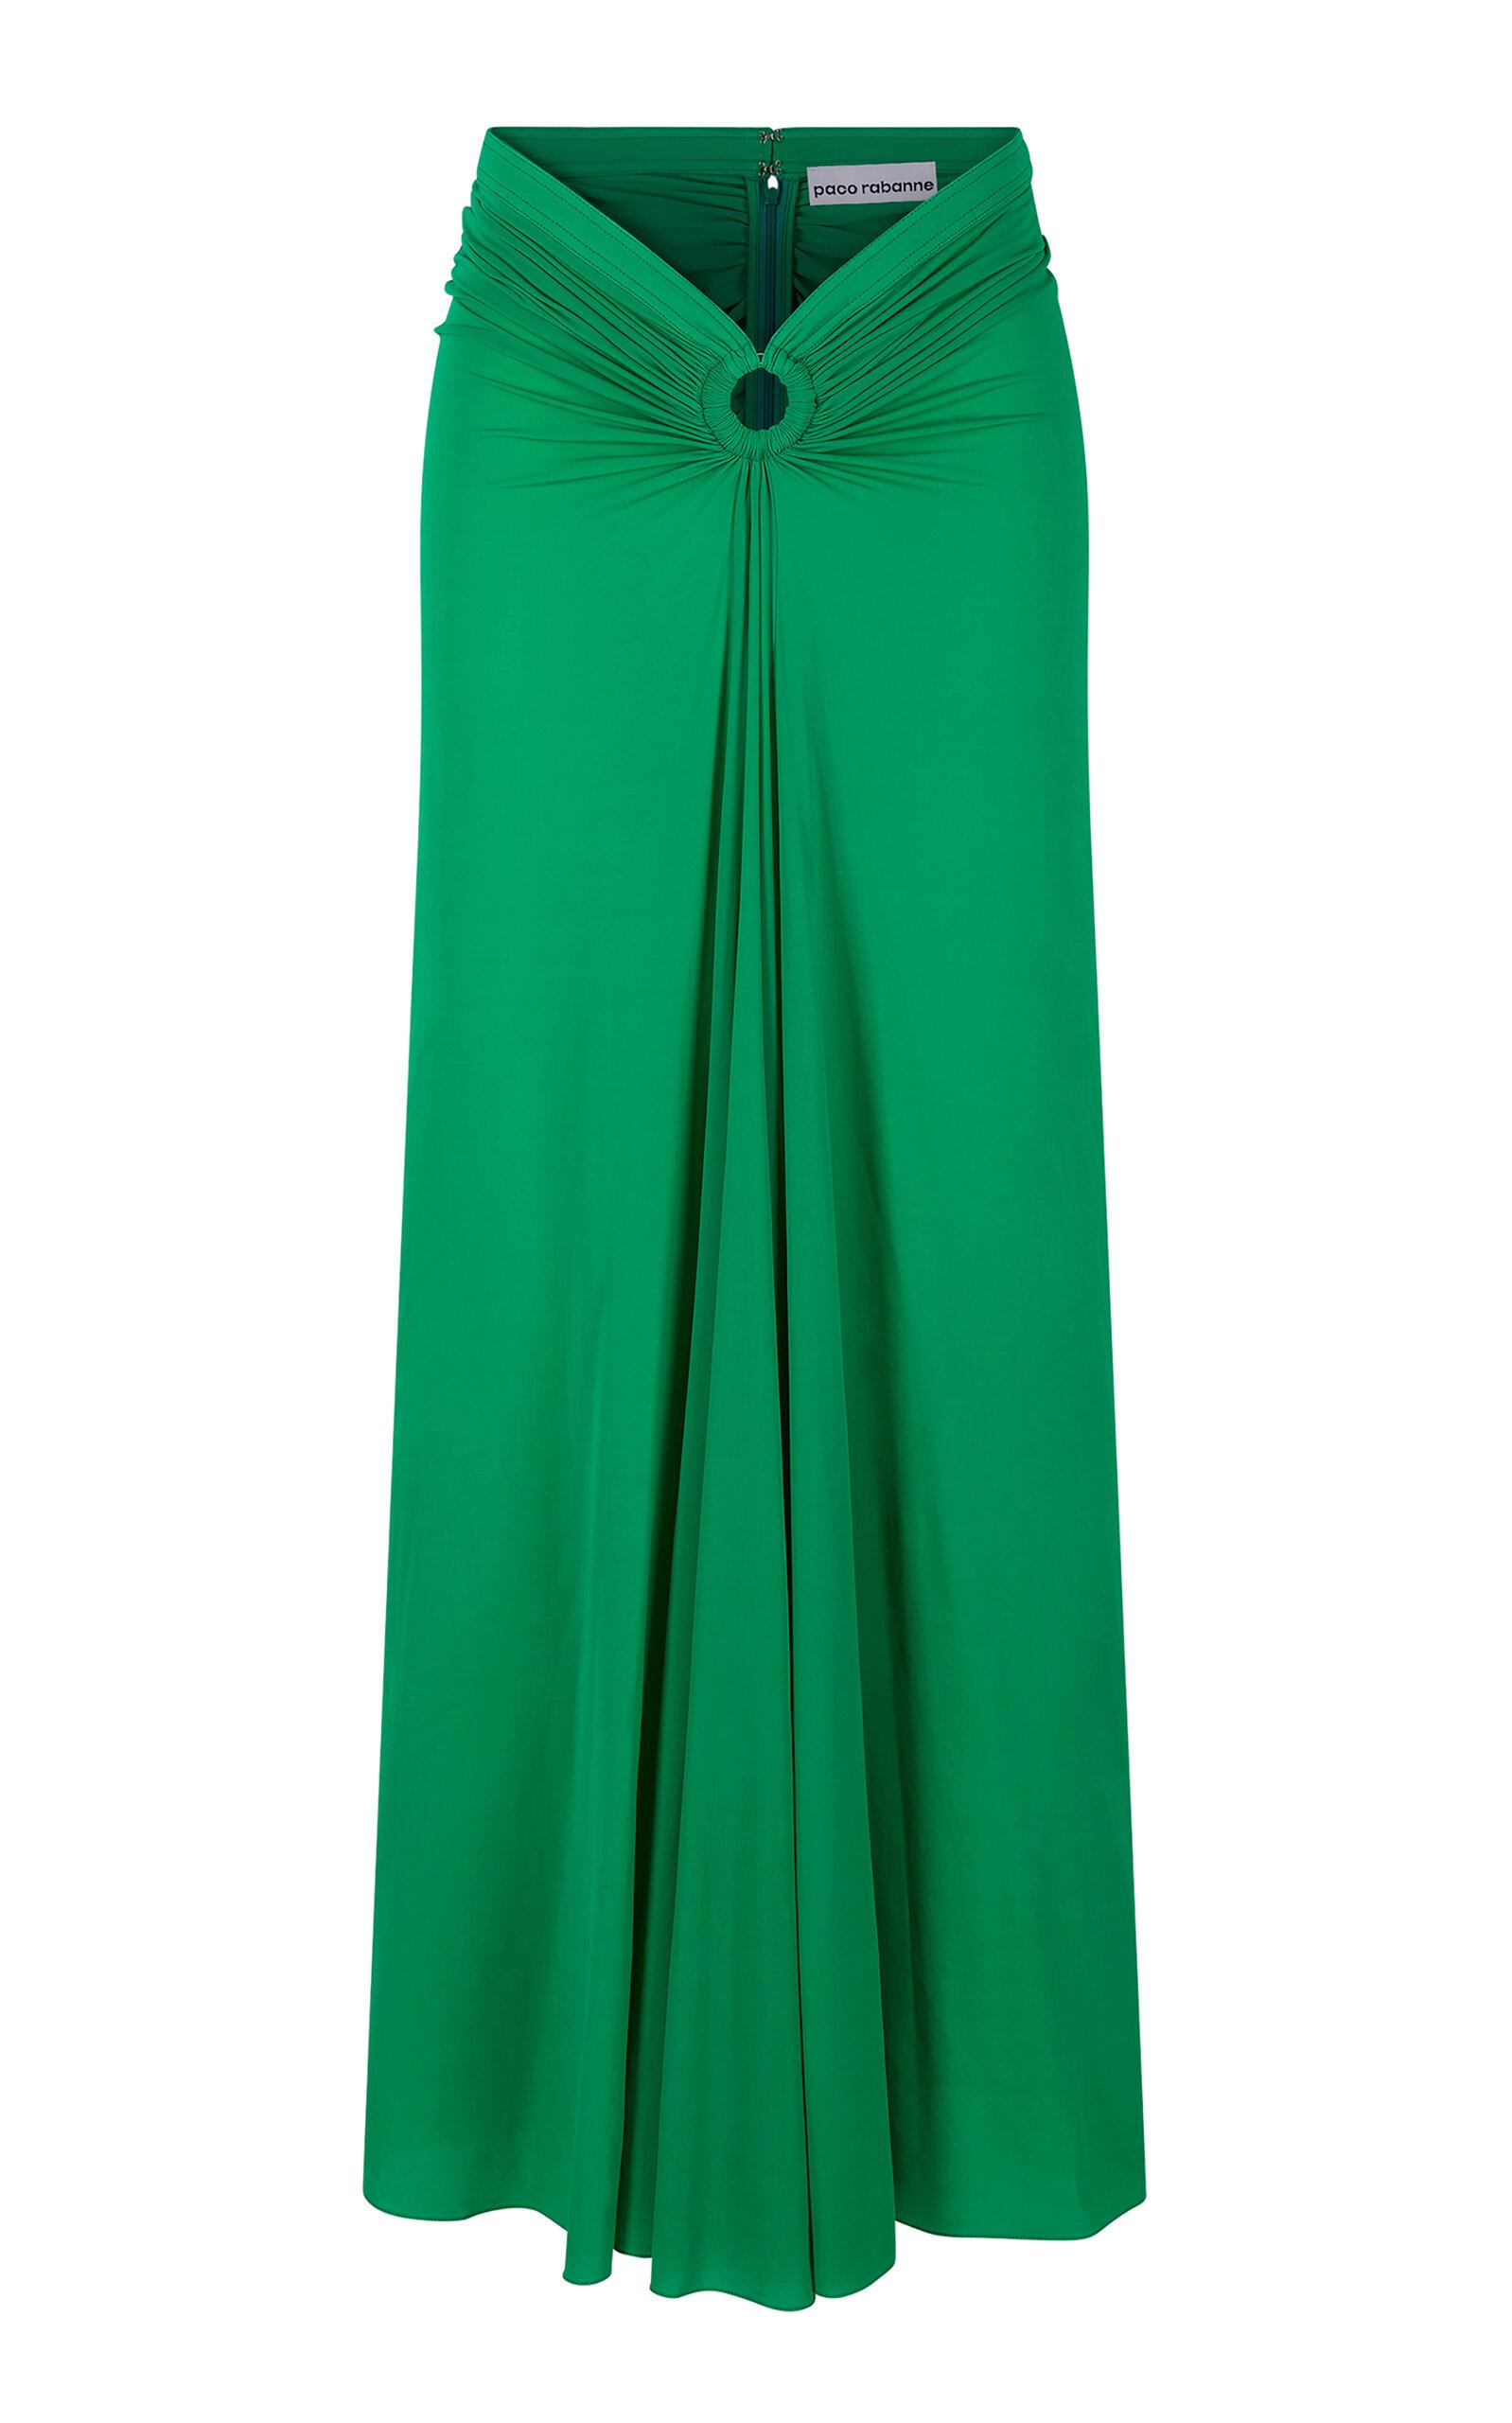 Paco Rabanne Gathered Maxi Skirt in Green | Lyst